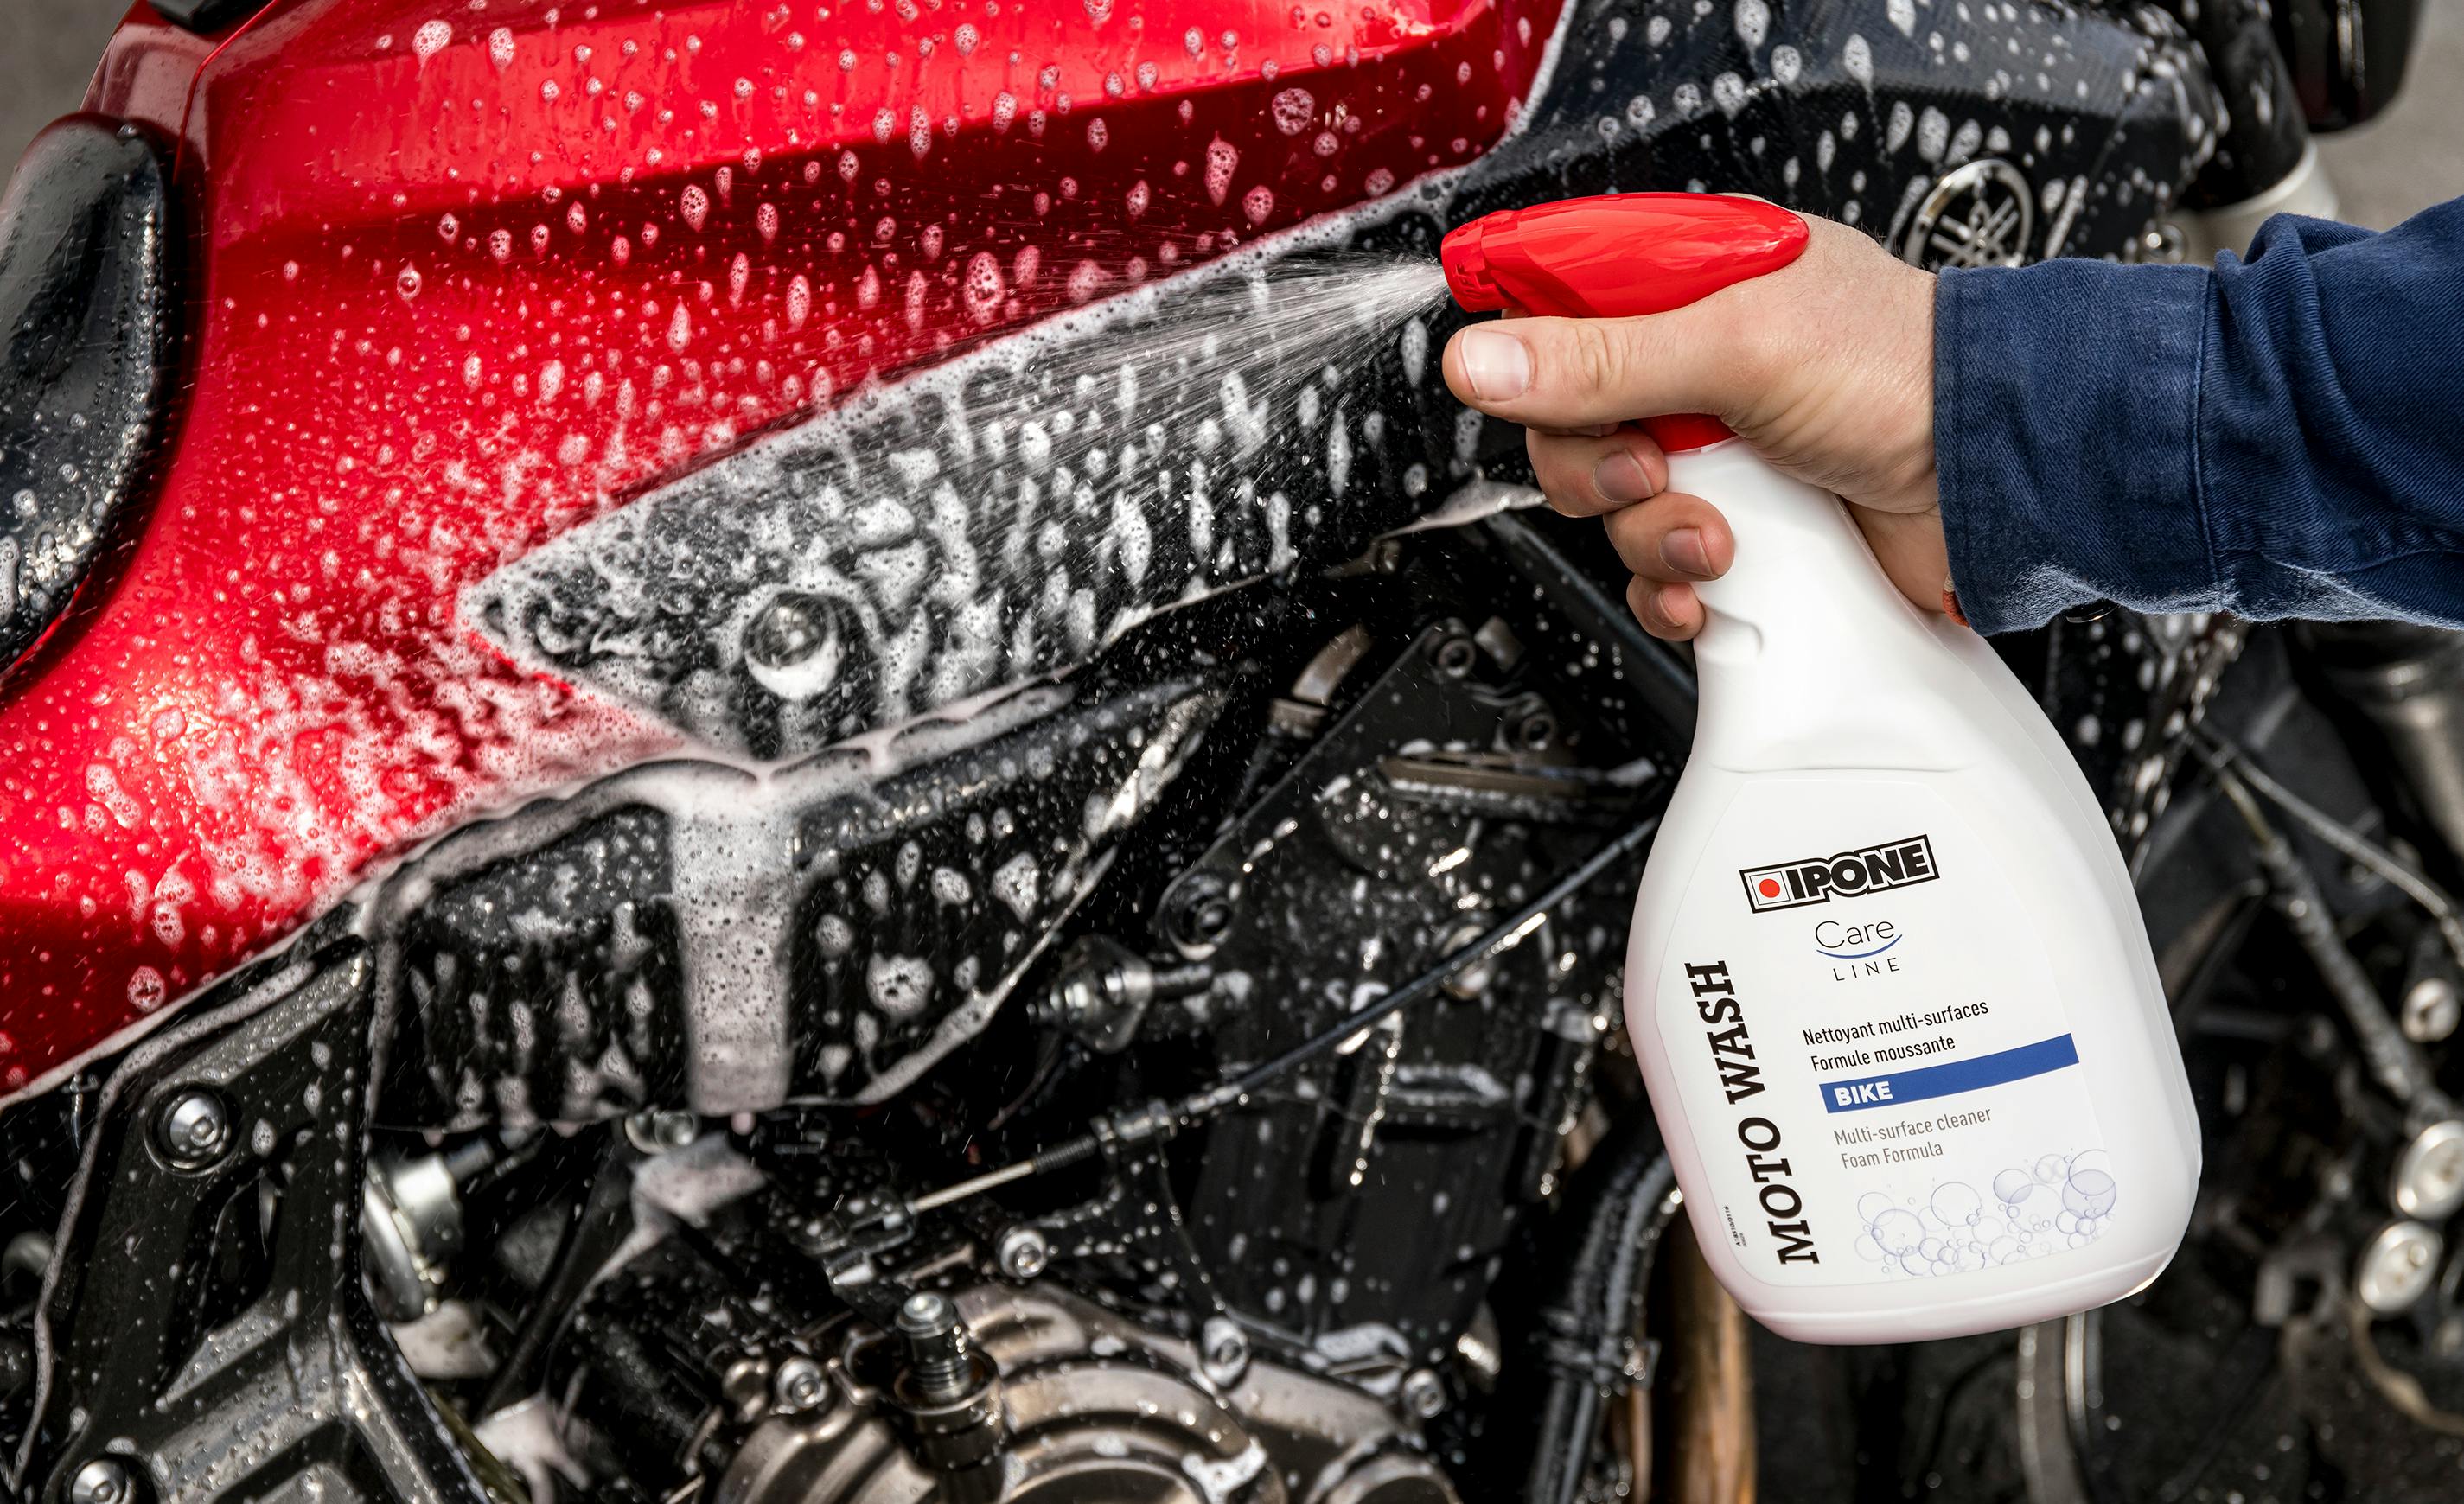 How to clean your motorcycle in 4 steps